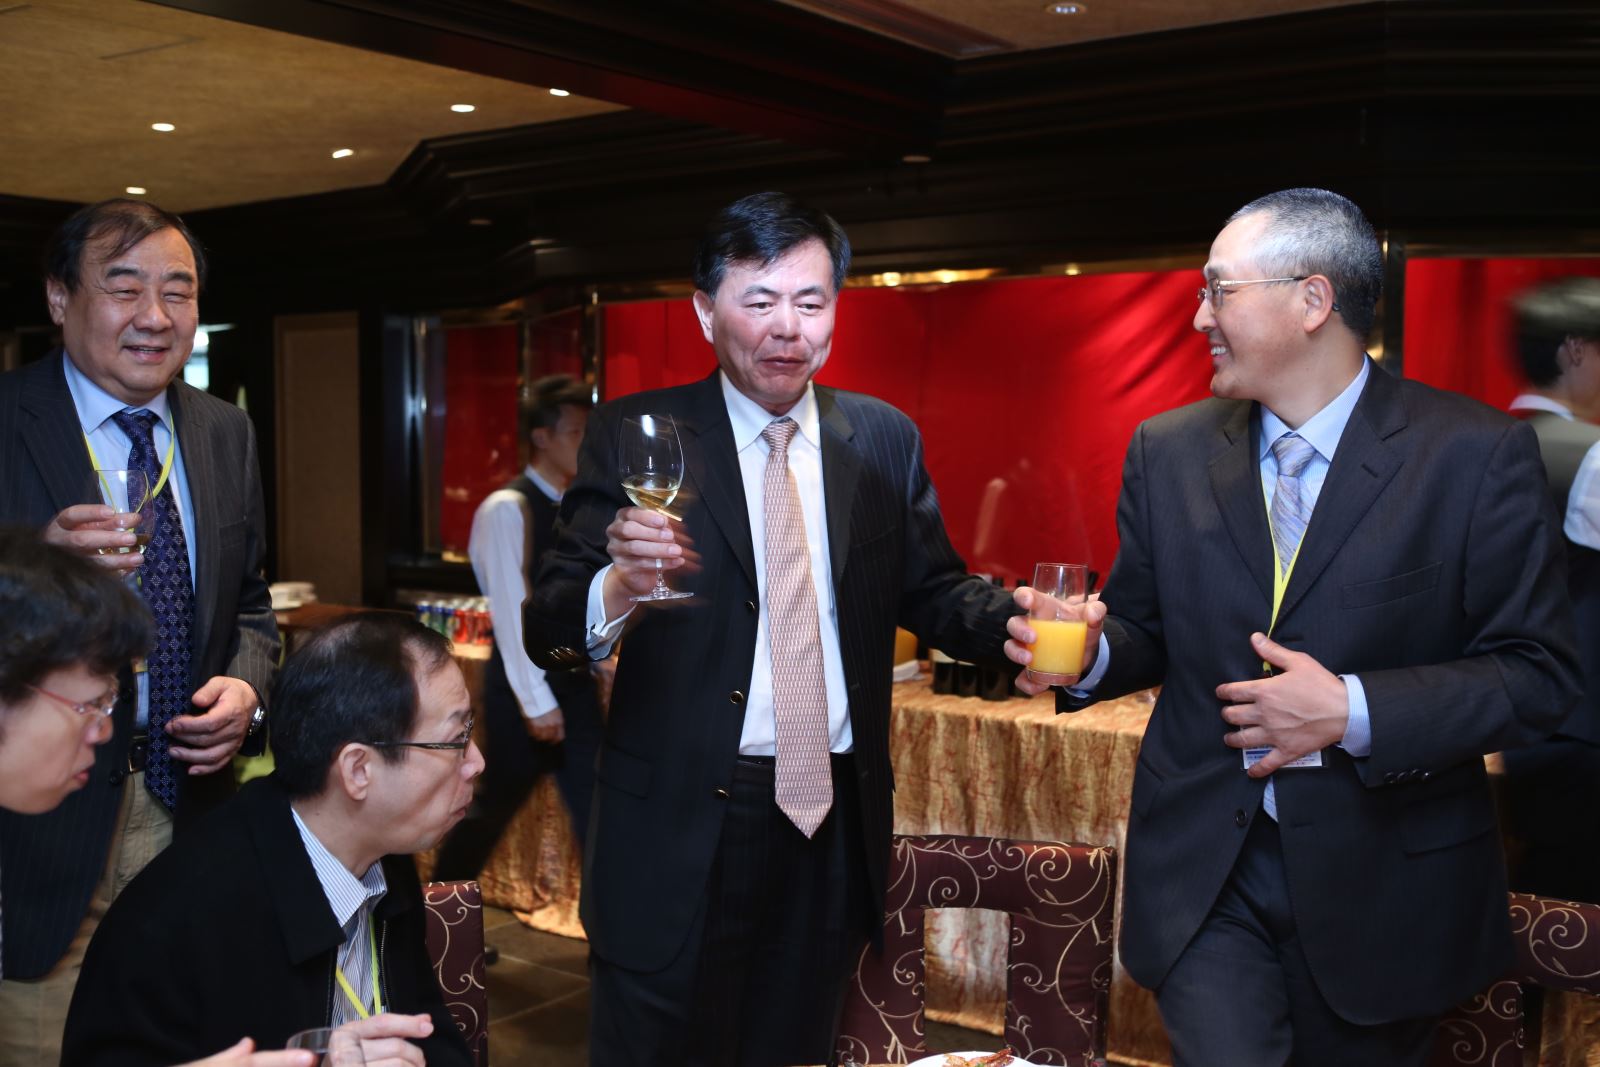 18th Cross-strait, Hong Kong & Macau Insurance Business Conference - Welcome Dinner